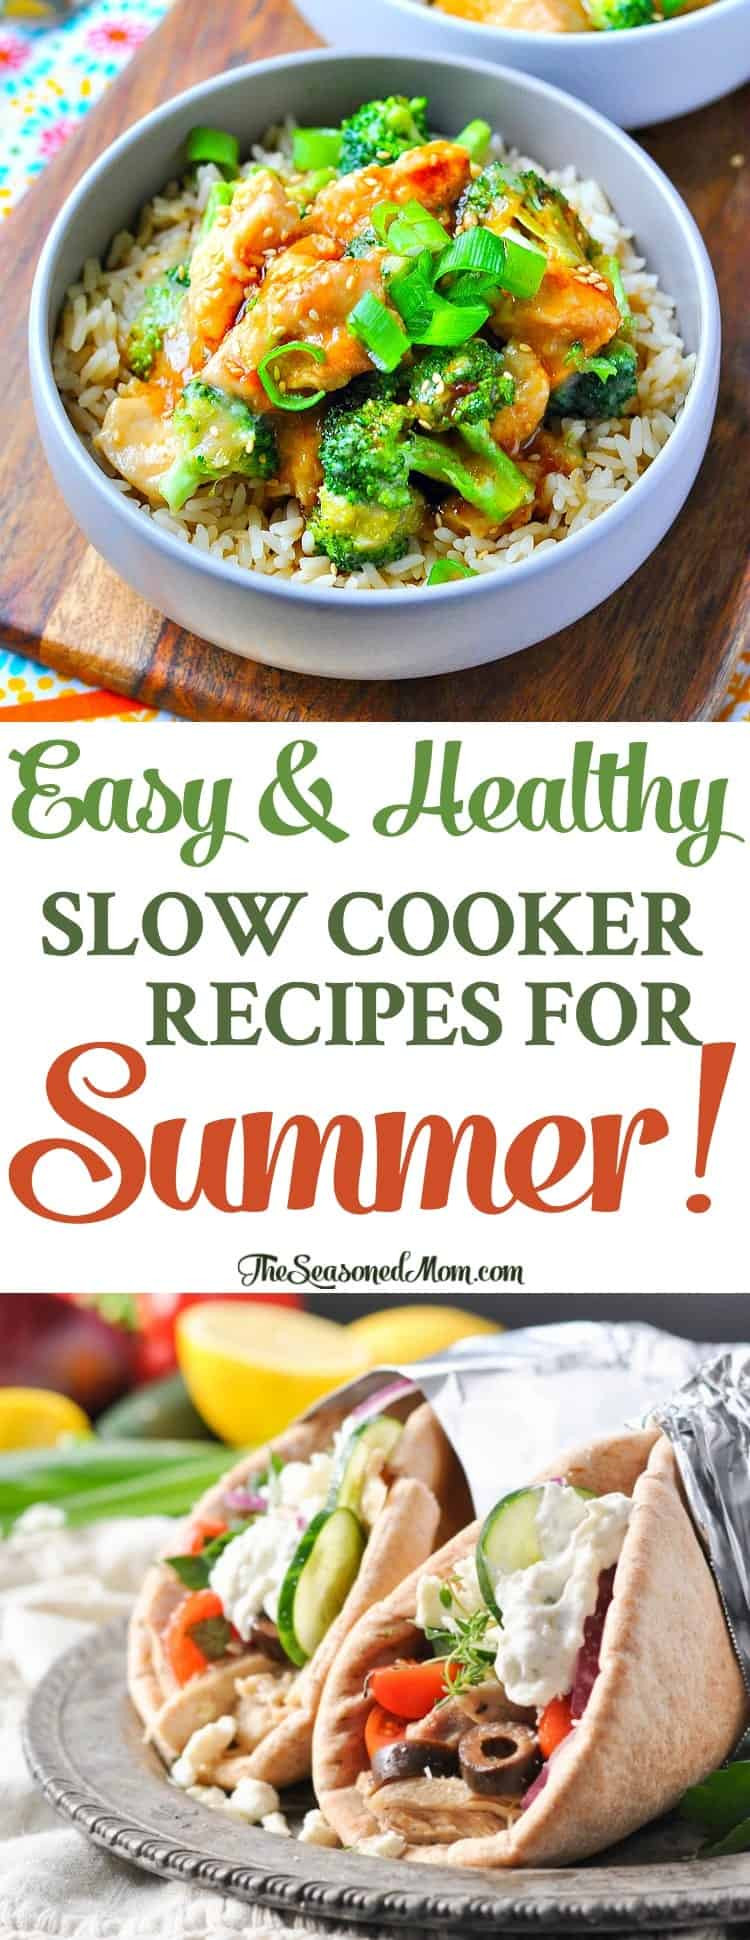 Summer Crock Pot Ideas
 Easy Healthy Slow Cooker Recipes for Summer The